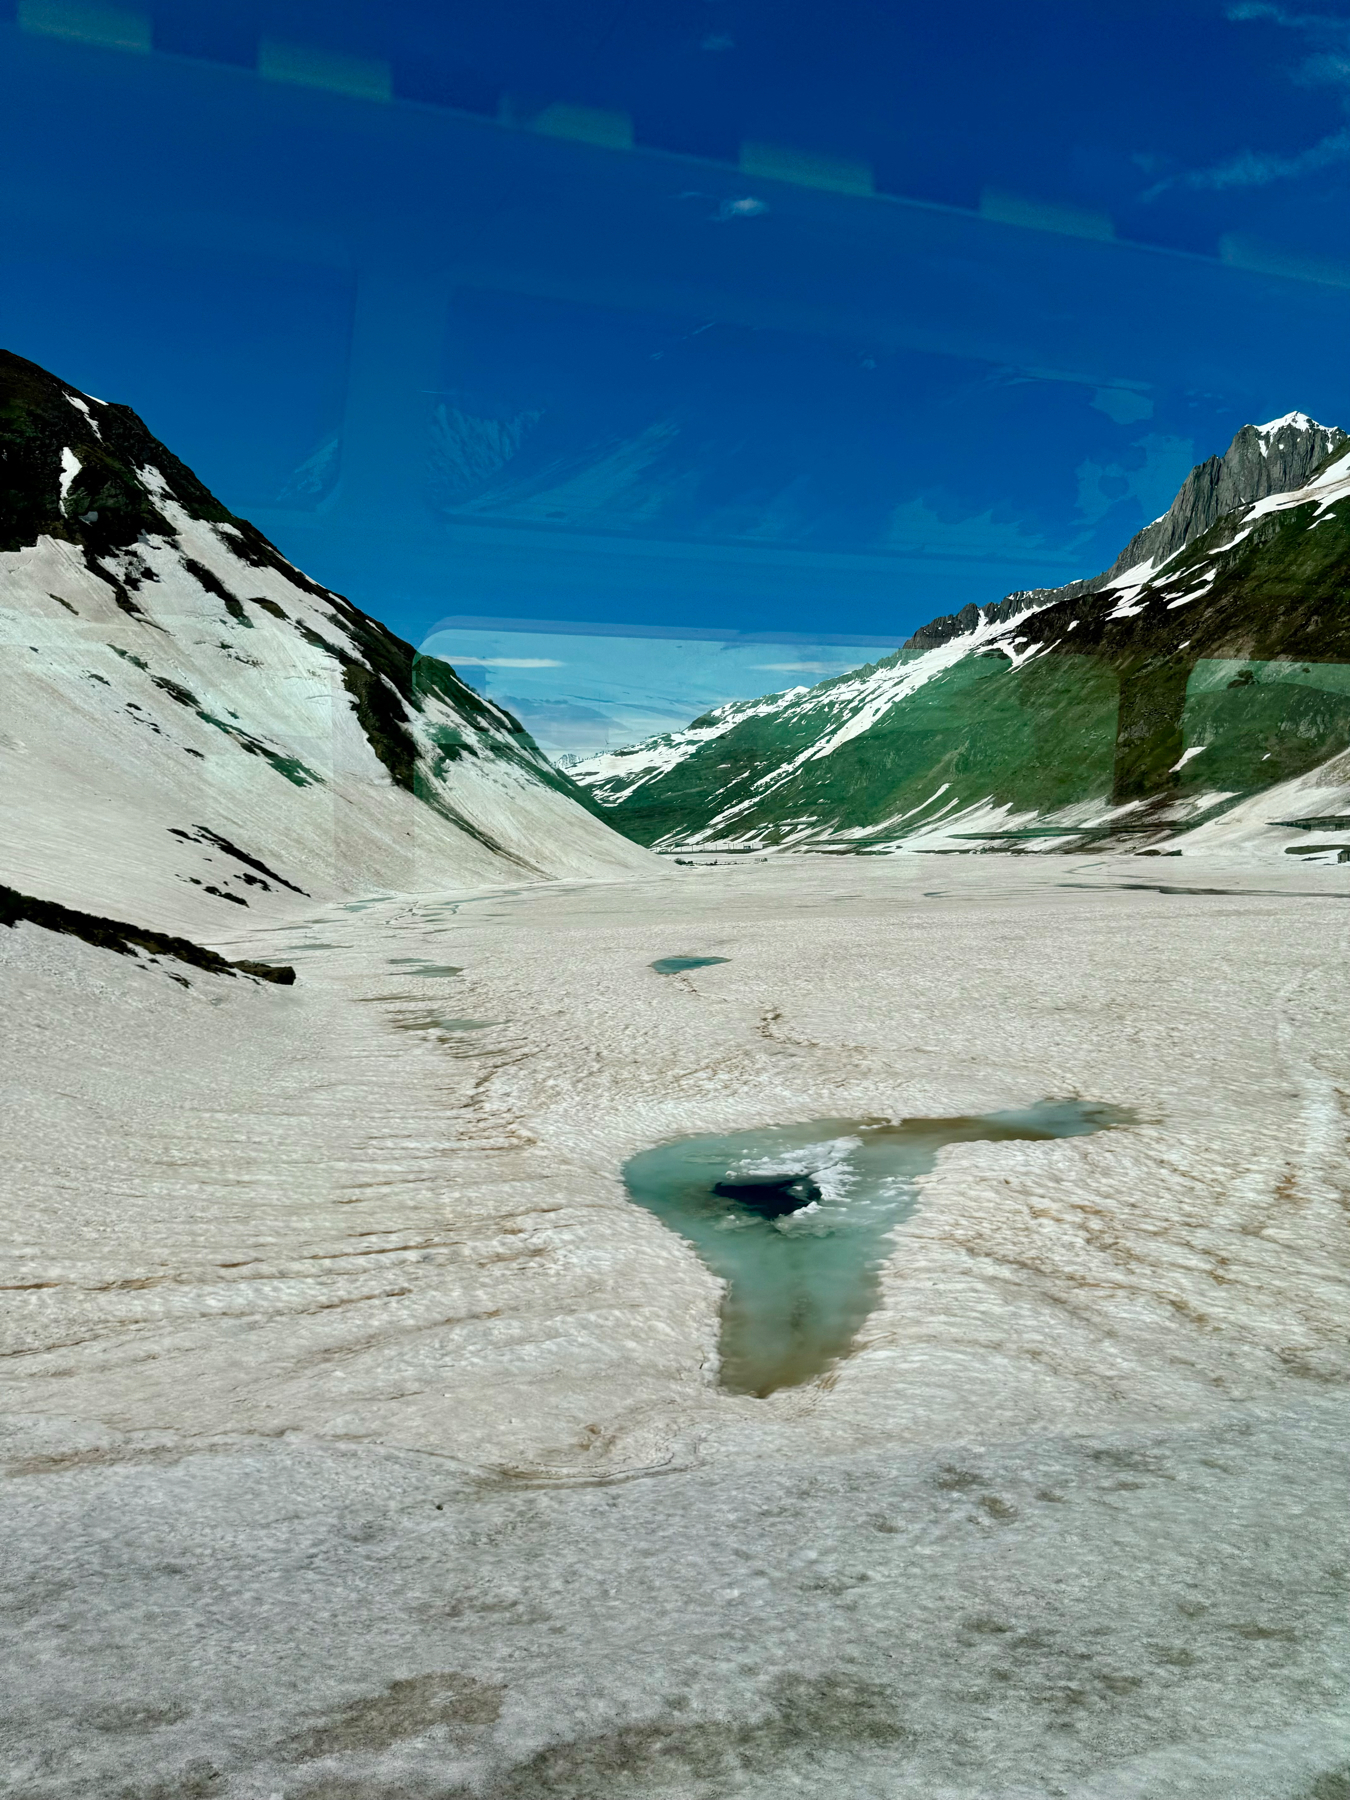 A glacier with a snow-covered surface featuring meltwater pools against a backdrop of mountain slopes and a clear blue sky.